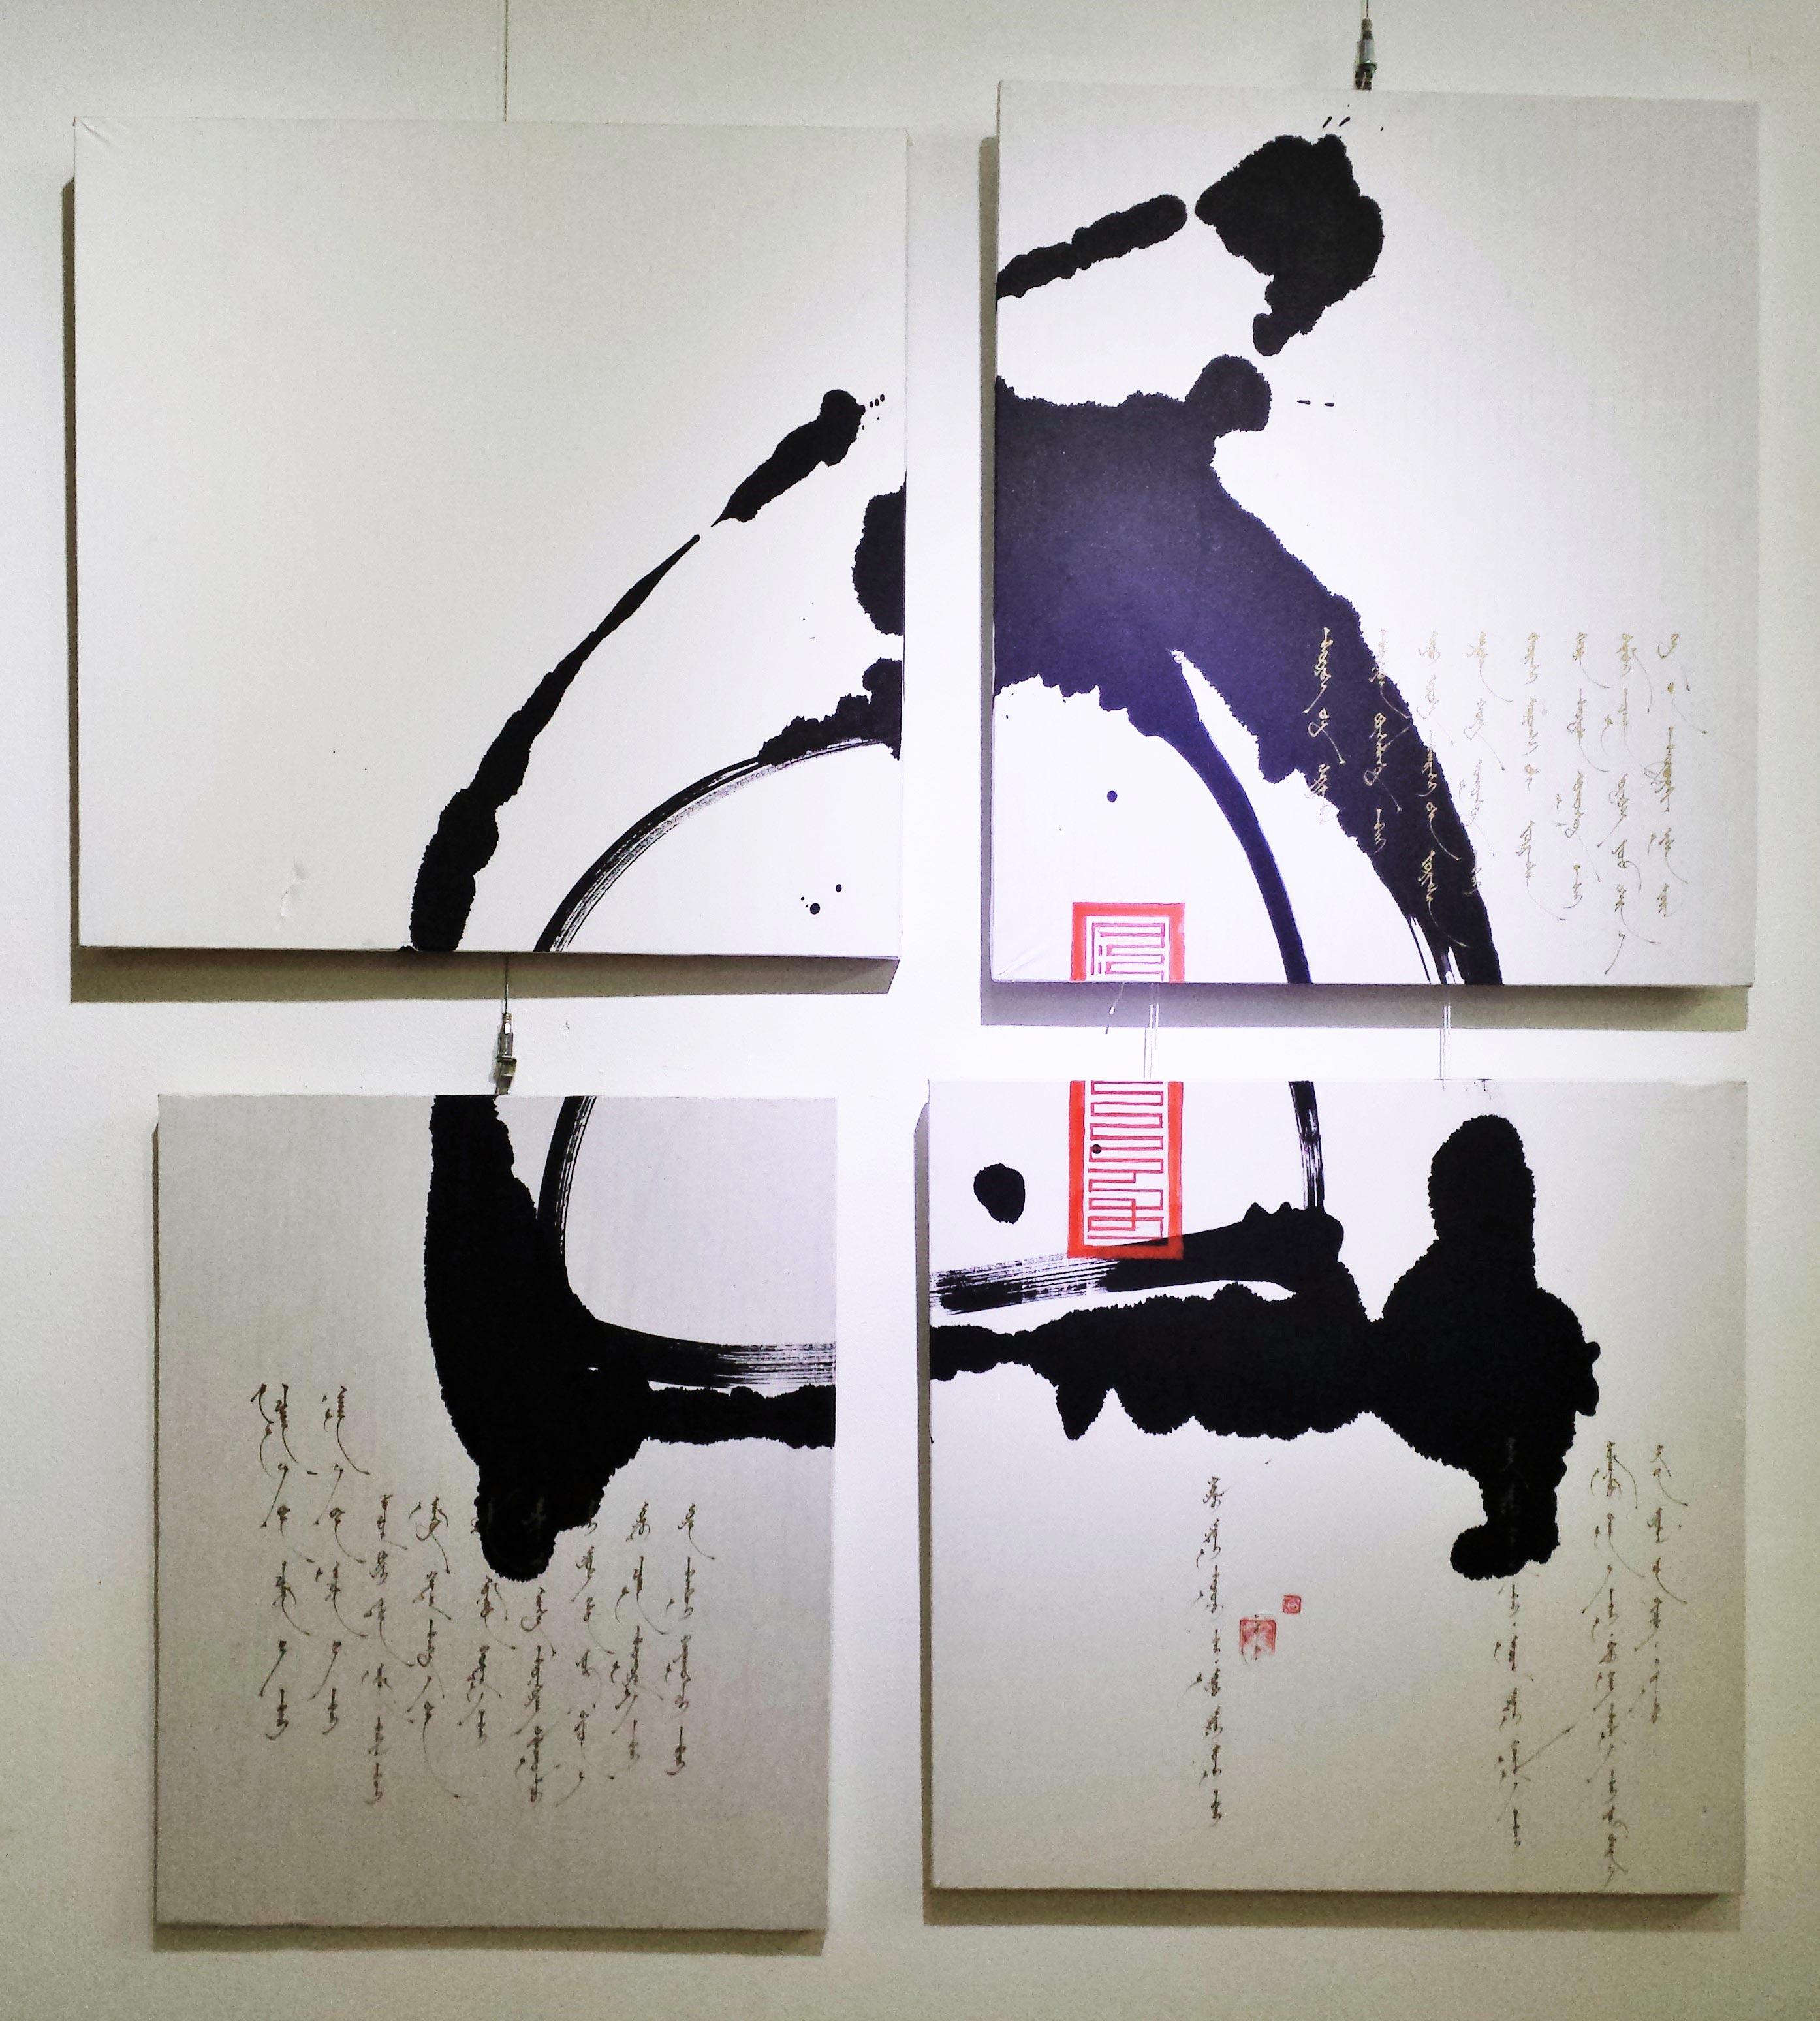 Mongolian calligraphy - image source Wikimedia Commons 2014 by Anand Orkhon